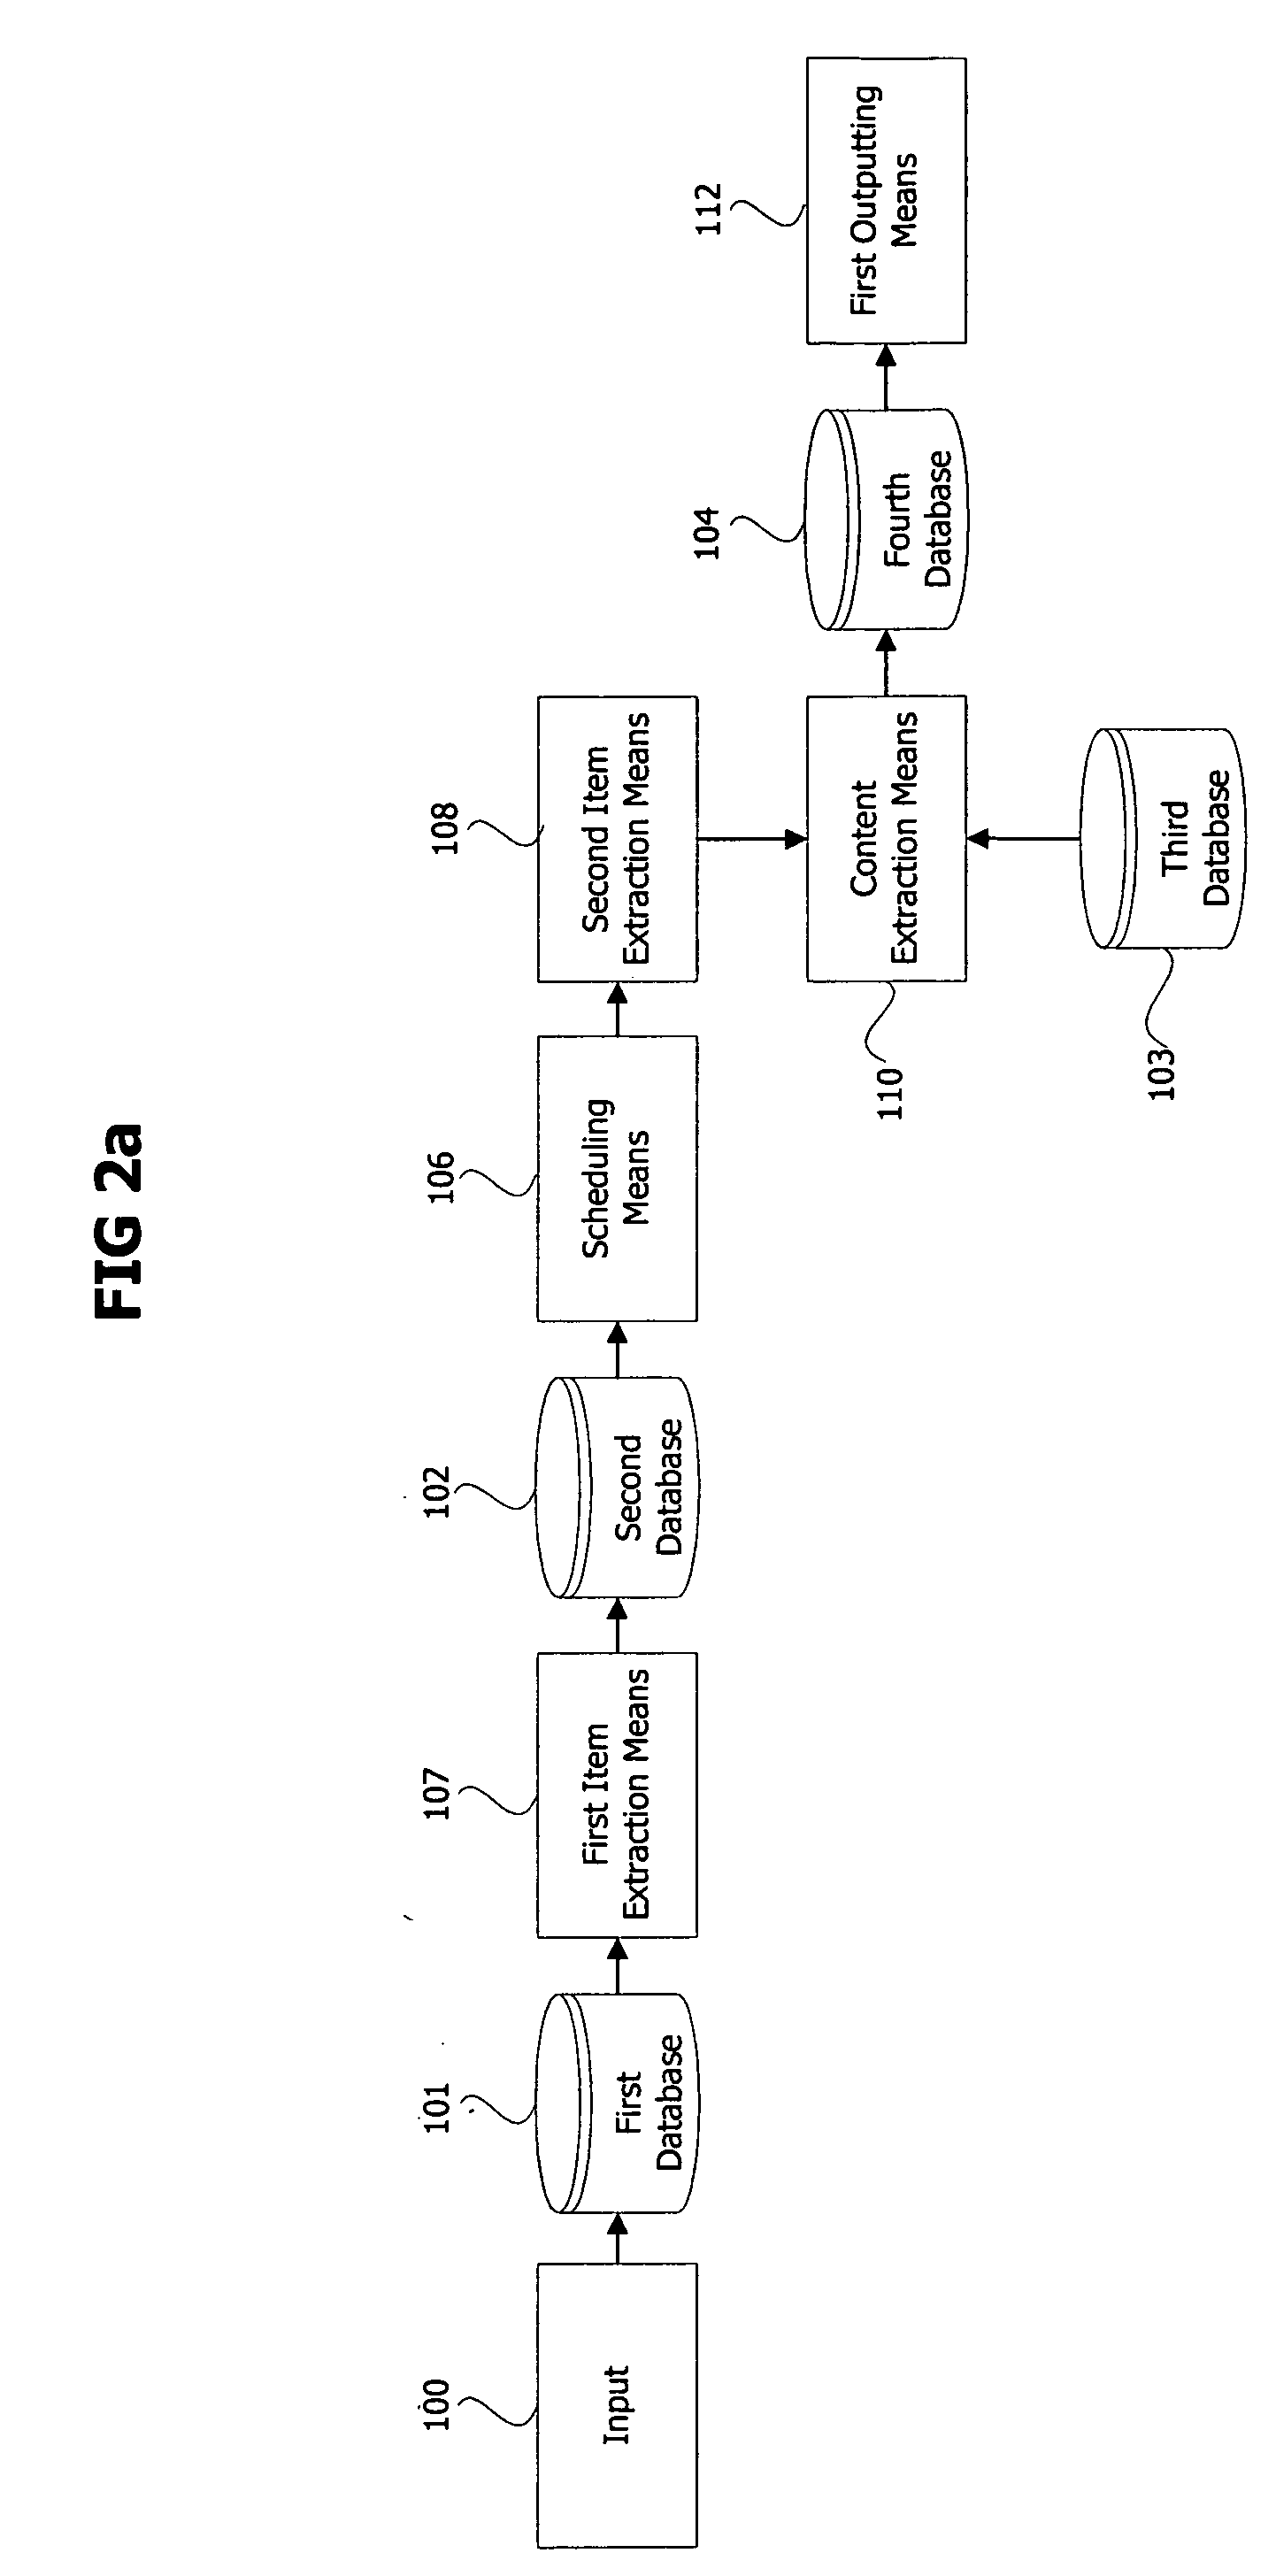 Method and apparatus for flexibly and adaptively obtaining personalized study content, and study device including the same